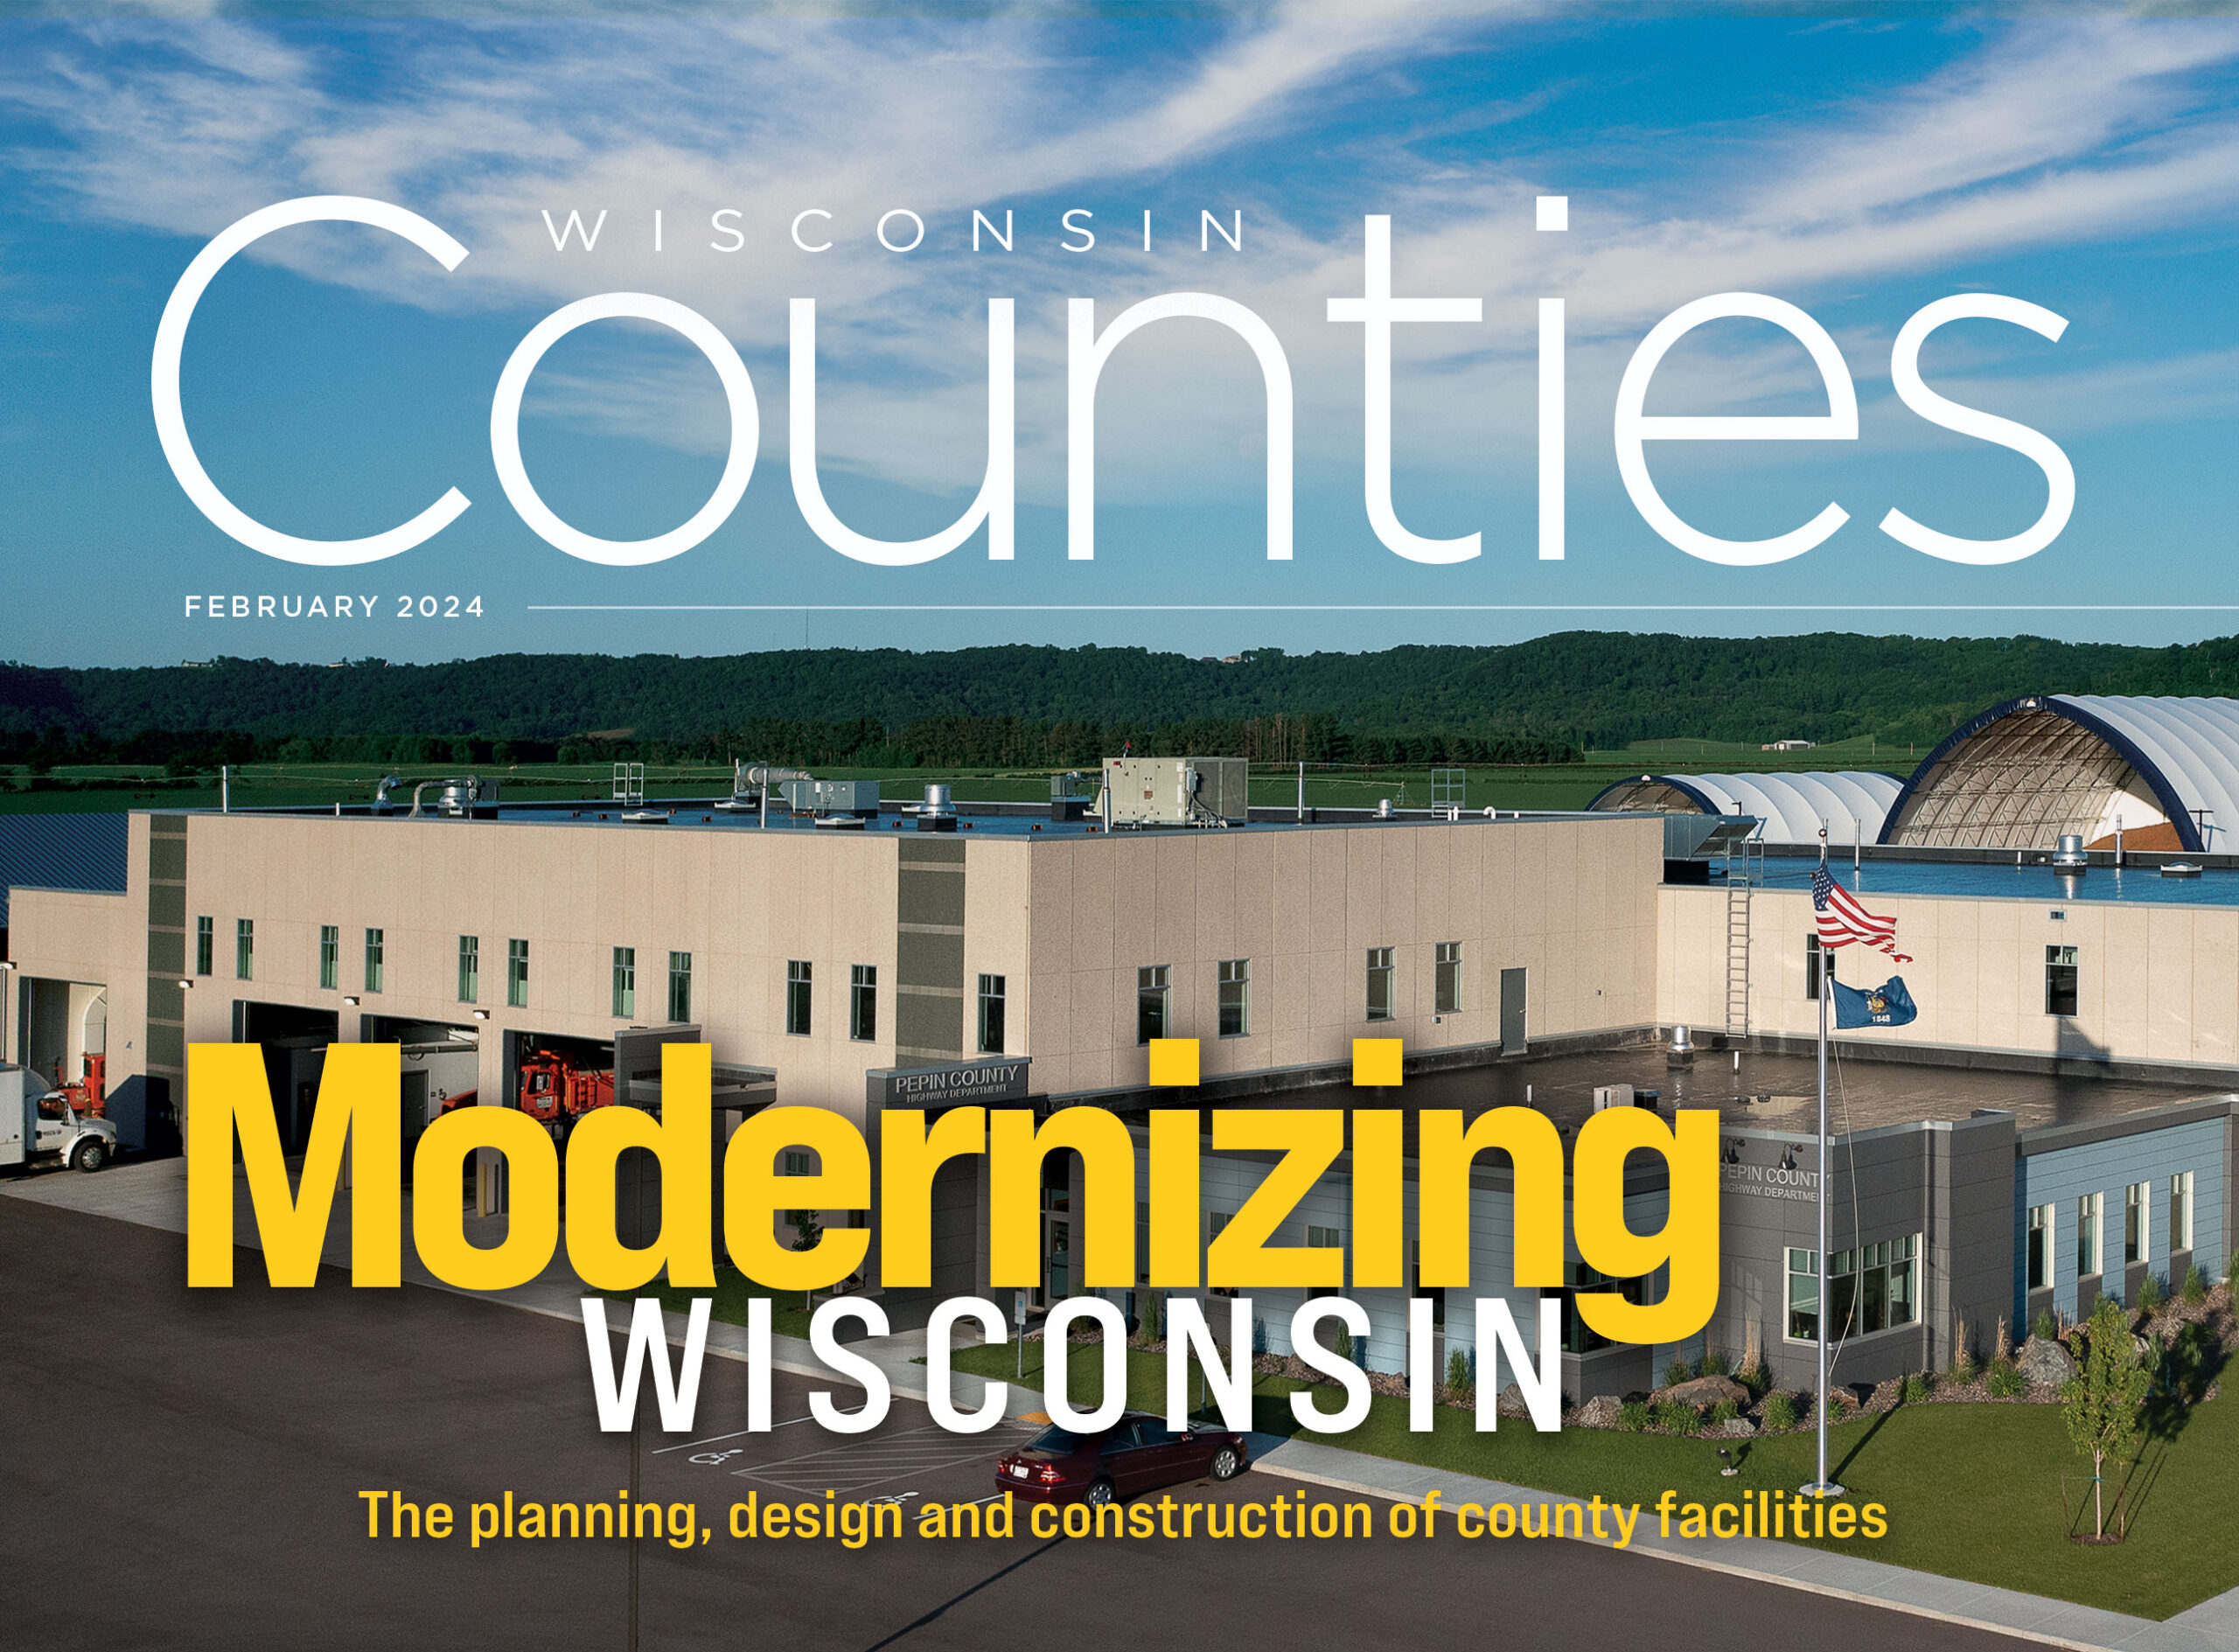 Modernizing Wisconsin: The Planning, Design and Construction of County Facilities